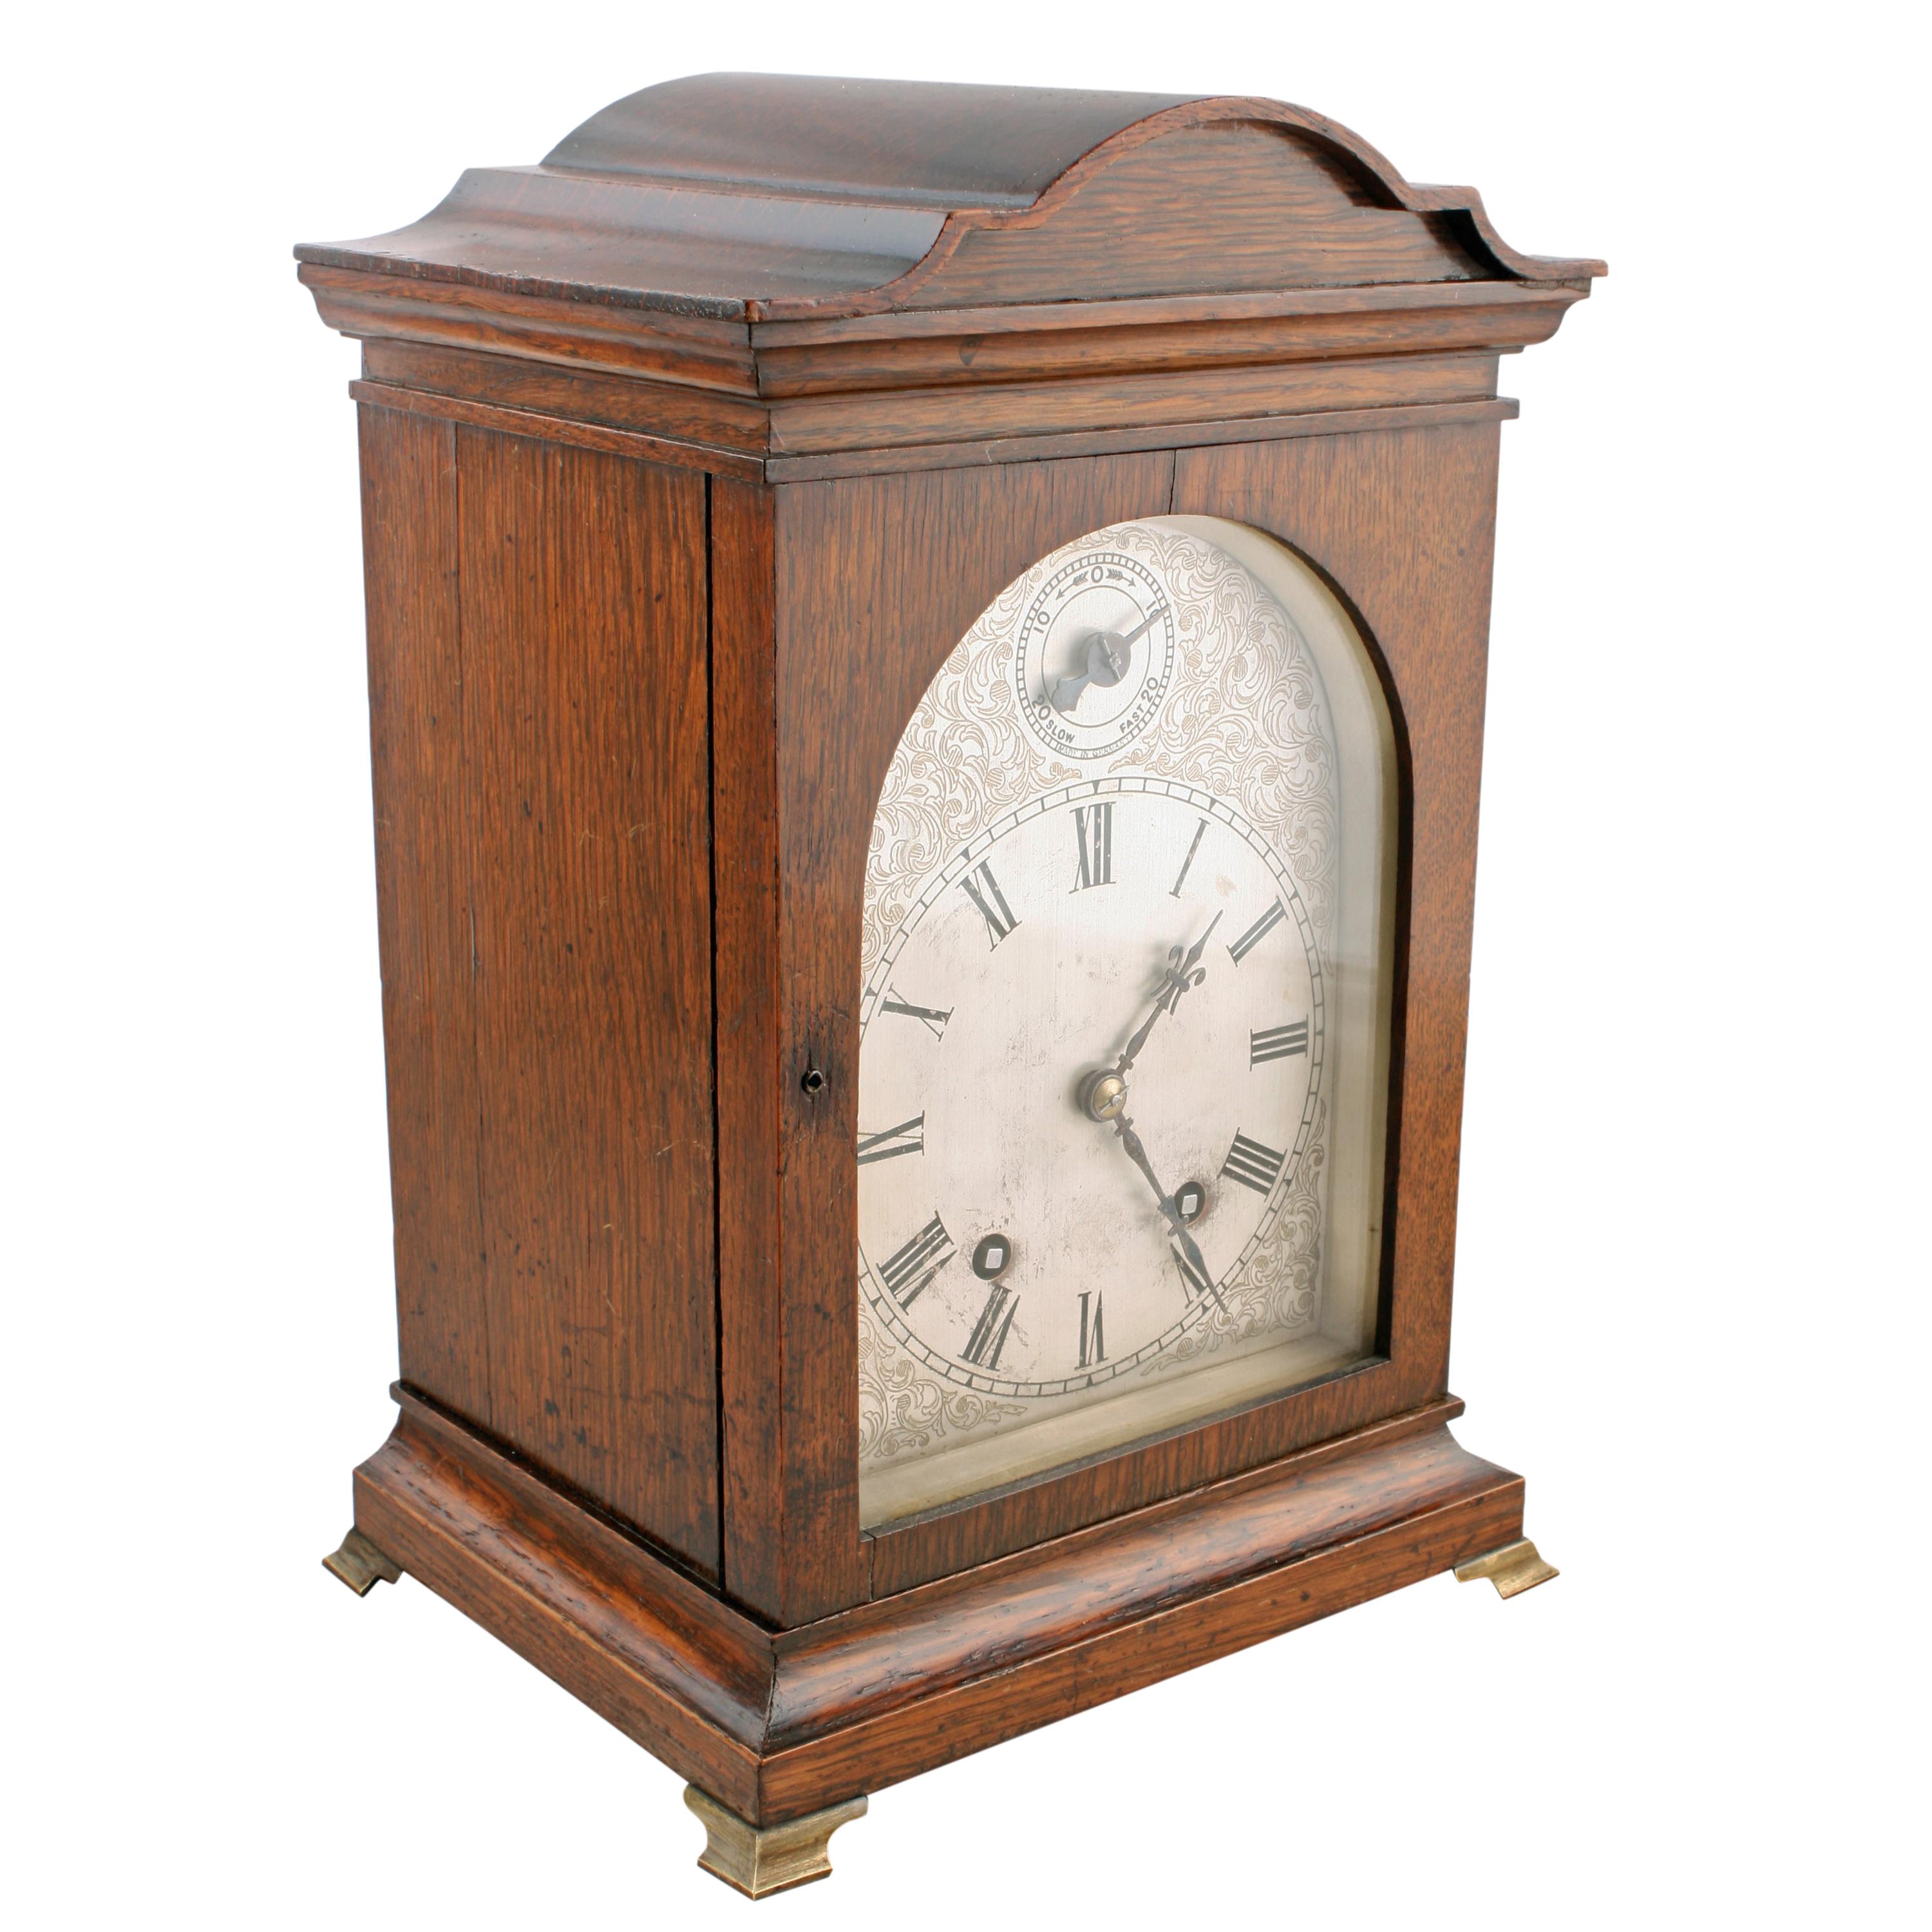 A late 19th to early 20th century oak cased mantel clock by Winterhalder and Hofmeier.

The clock has an eight day movement that strikes the hour and quarters on a pair of spiral gongs.

The works are stamped 